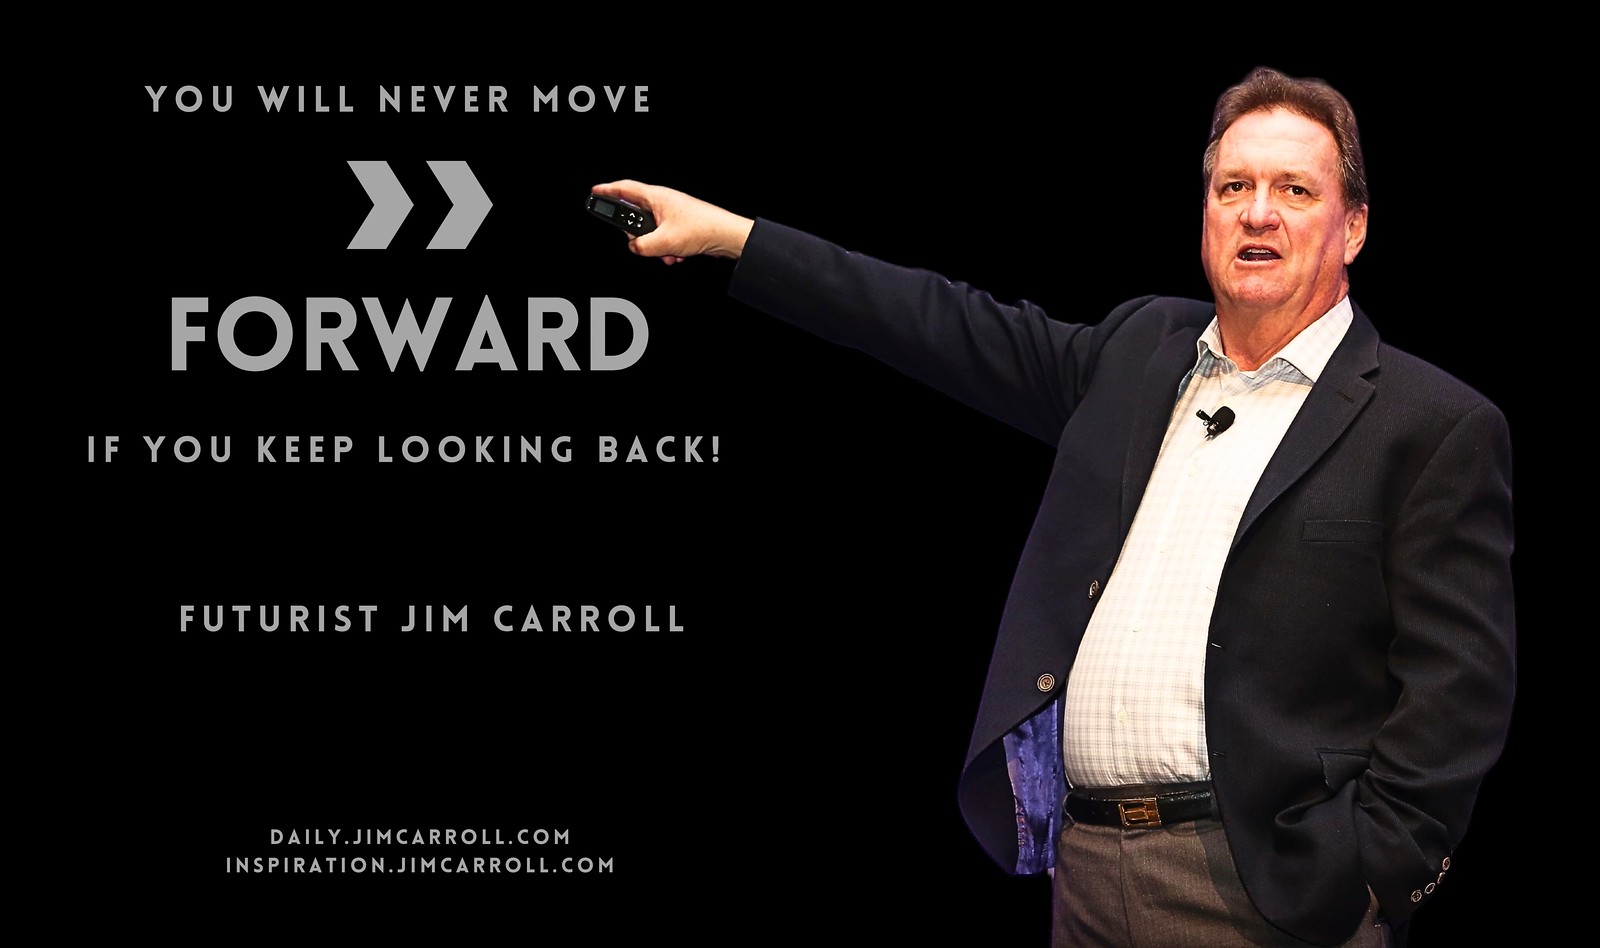 "You will never move forward if you keep looking back!" - Futurist Jim Carroll